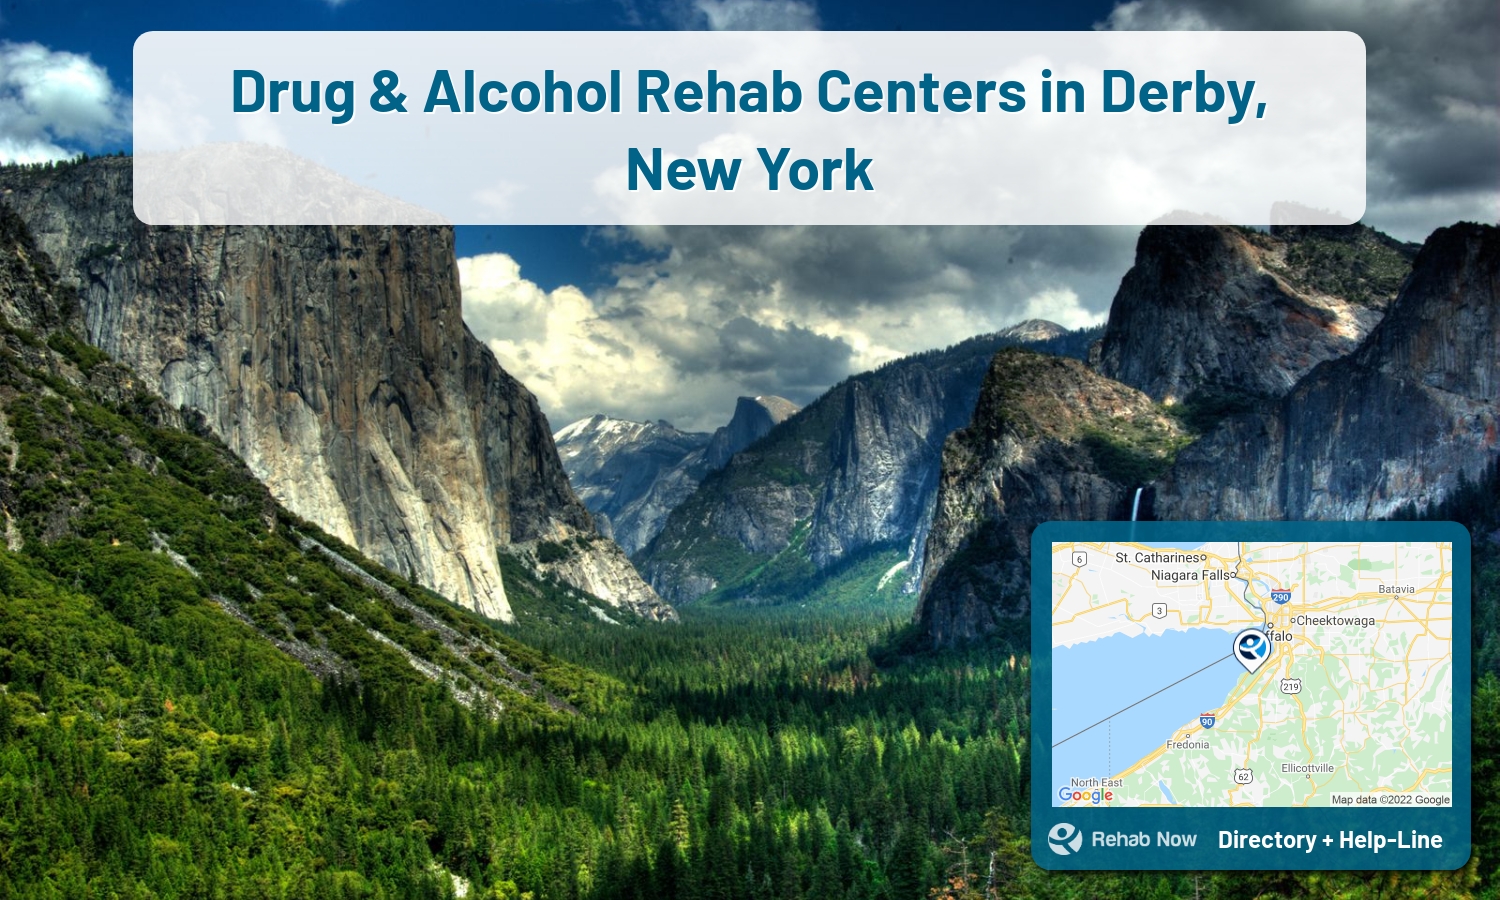 Let our expert counselors help find the best addiction treatment in Derby, New York now with a free call to our hotline.